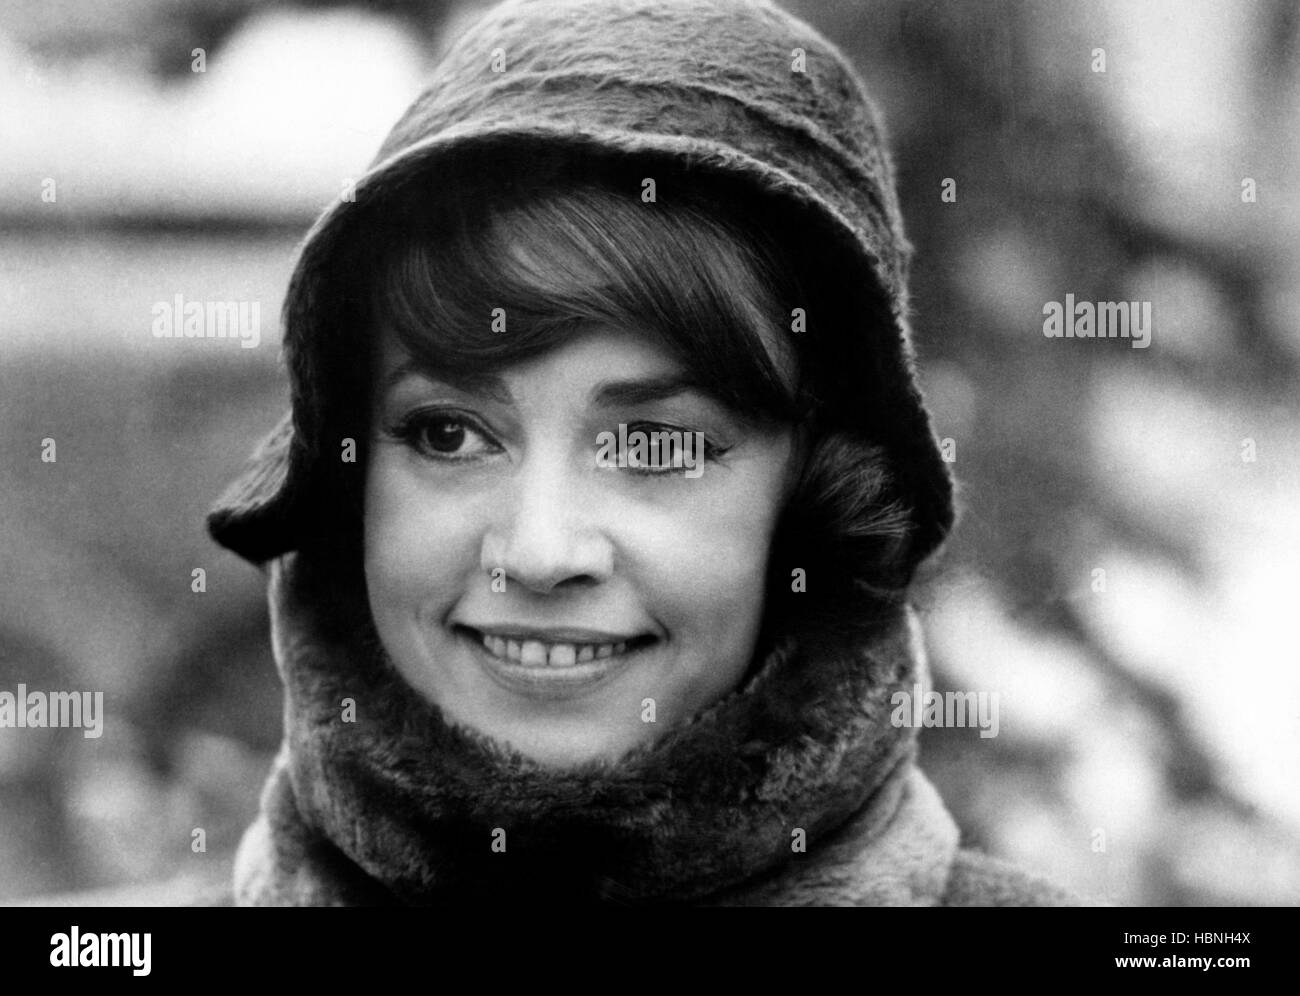 THE DIARY OF A CHAMBERMAID, Jeanne Moreau, 1964 Stock Photo - Alamy